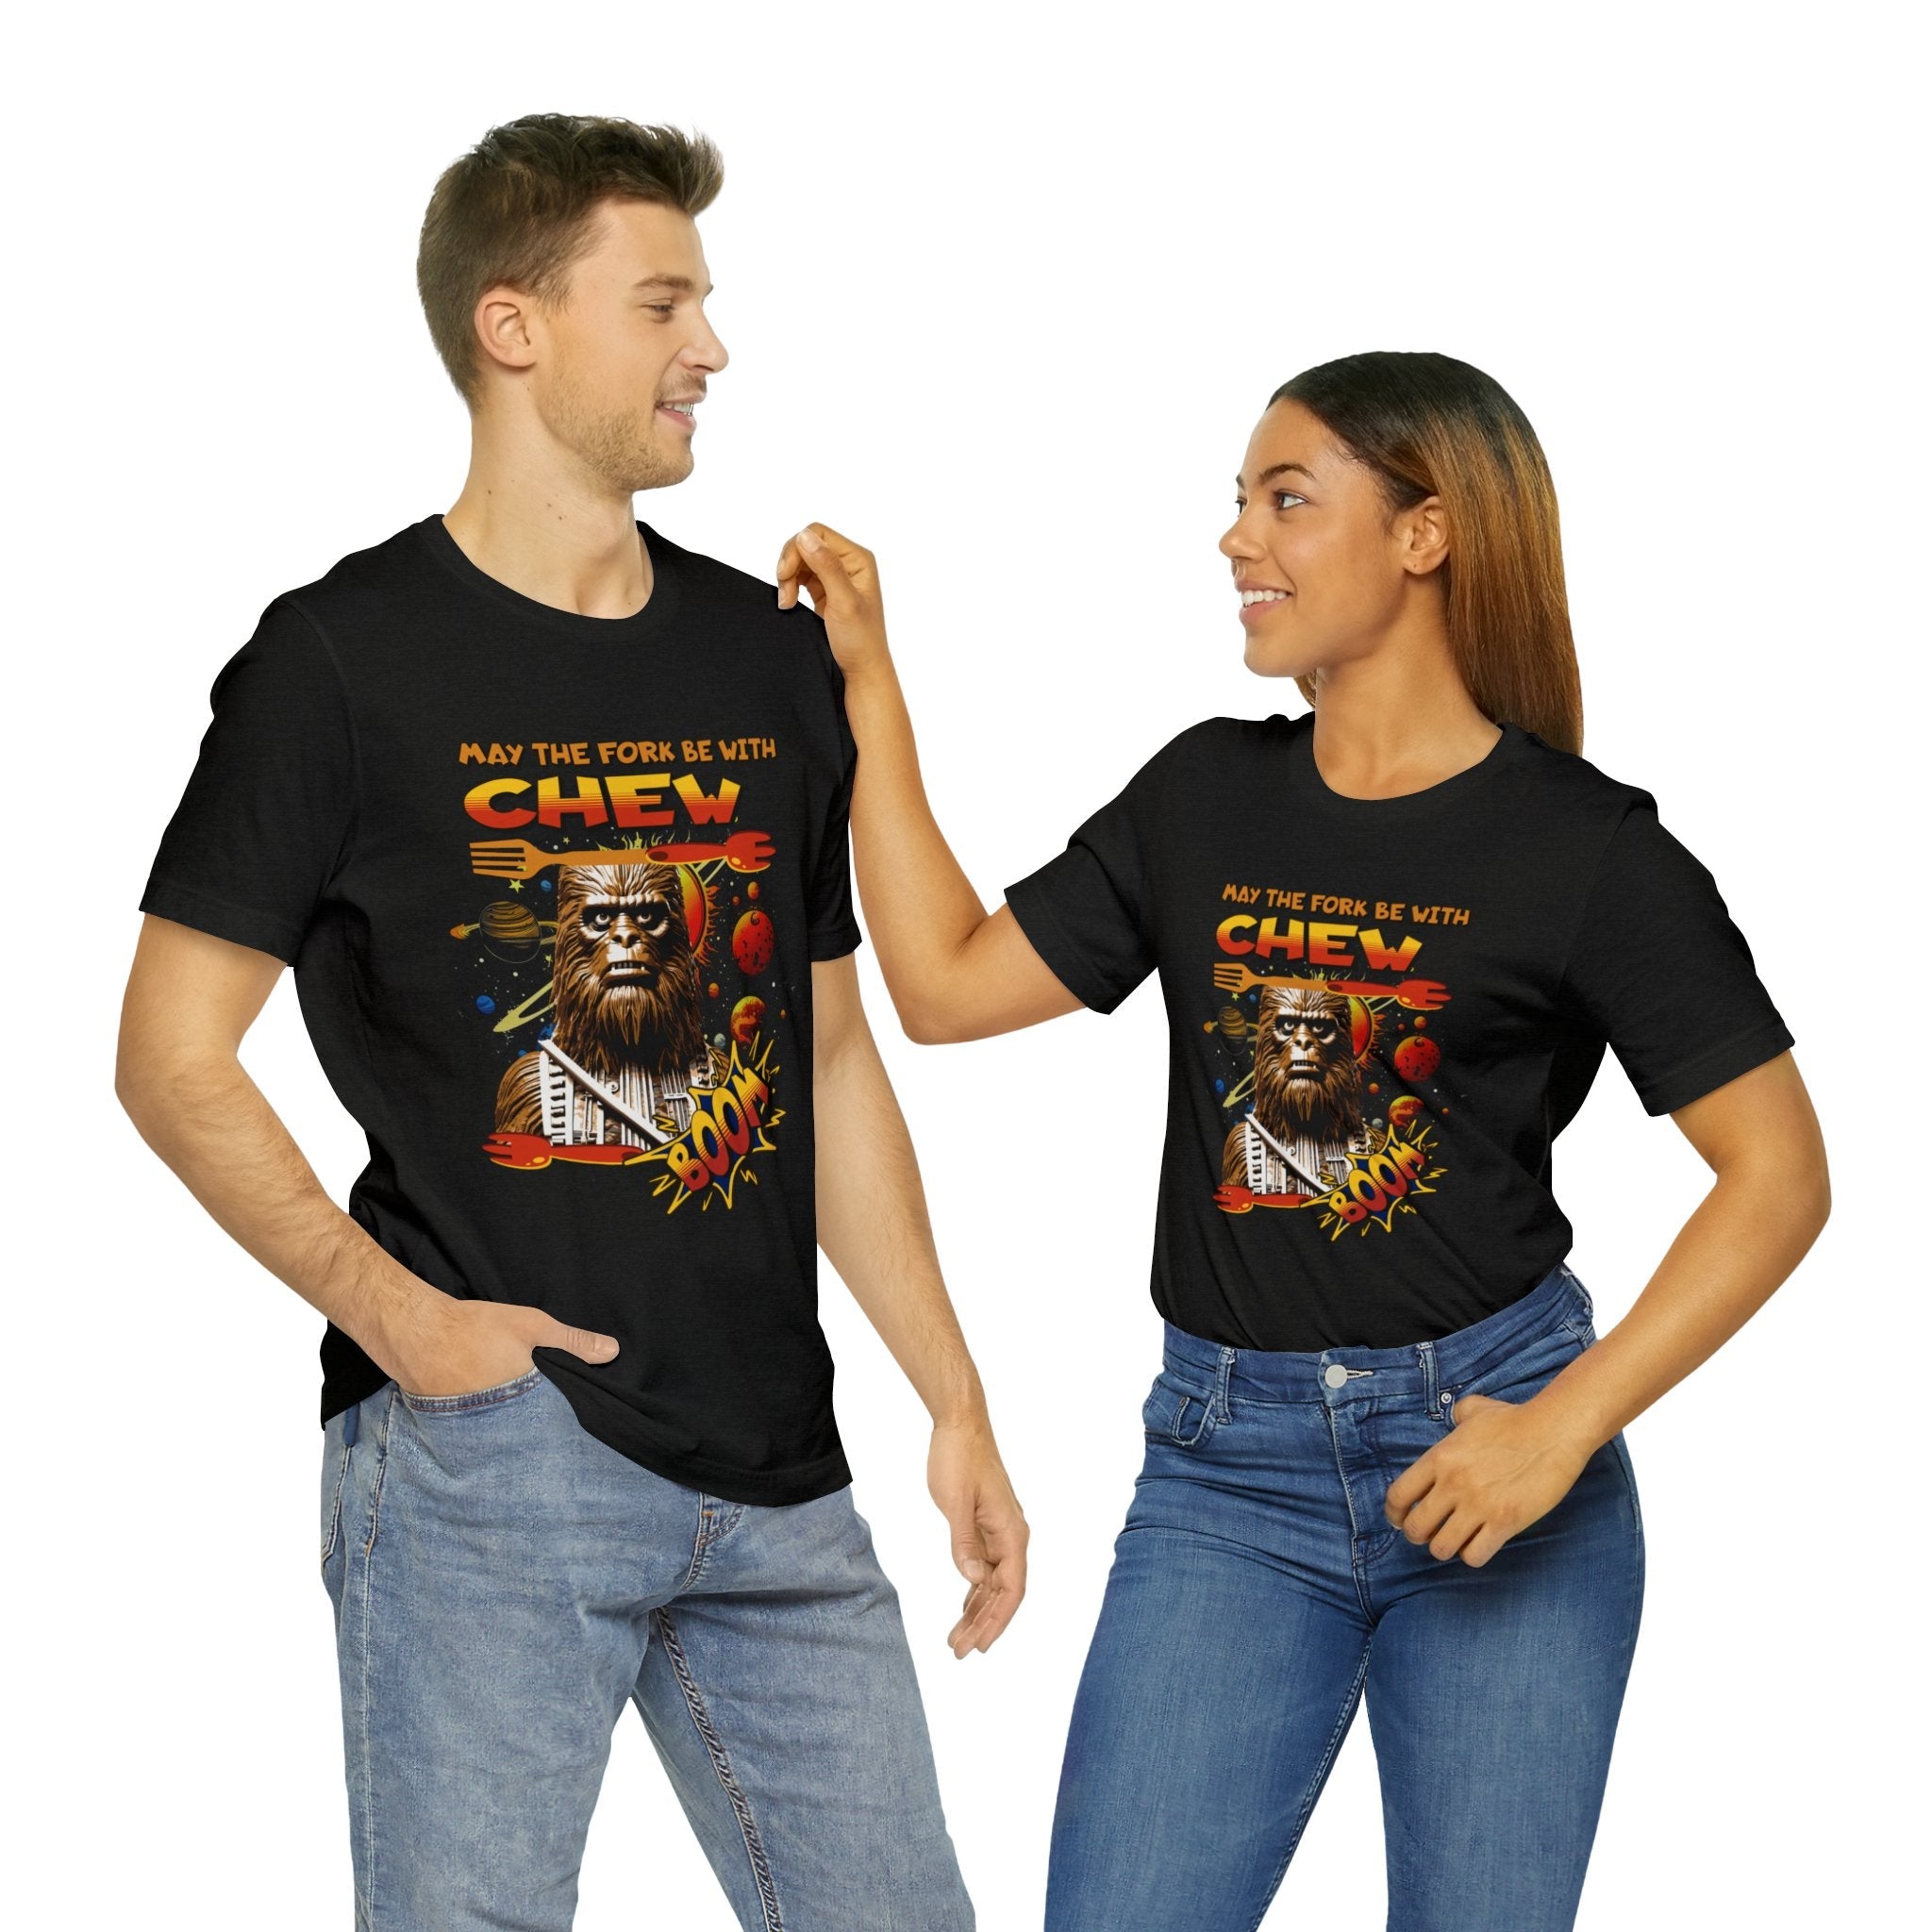 "May the Fork Be with Chew" Chewbacca Unisex Tee - Wookiee Dining Humor - MTL Dynamic StylesT-Shirt